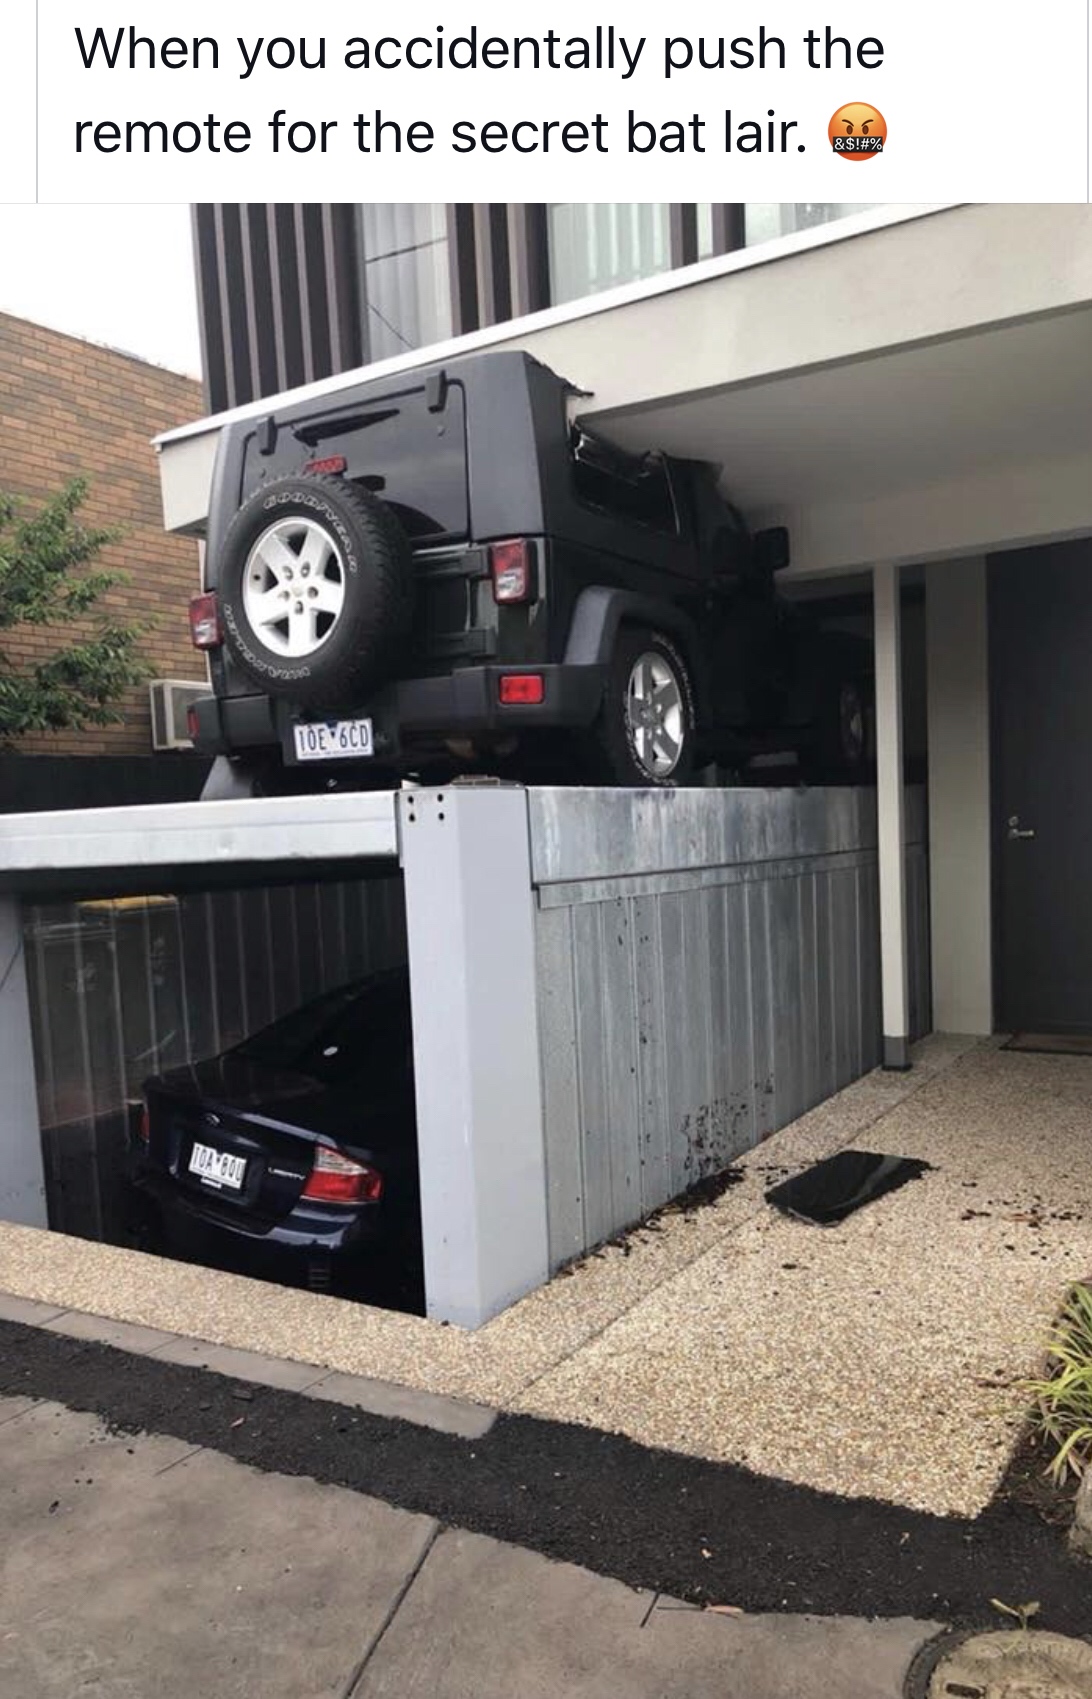 underground car lift fail - When you accidentally push the remote for the secret bat lair.